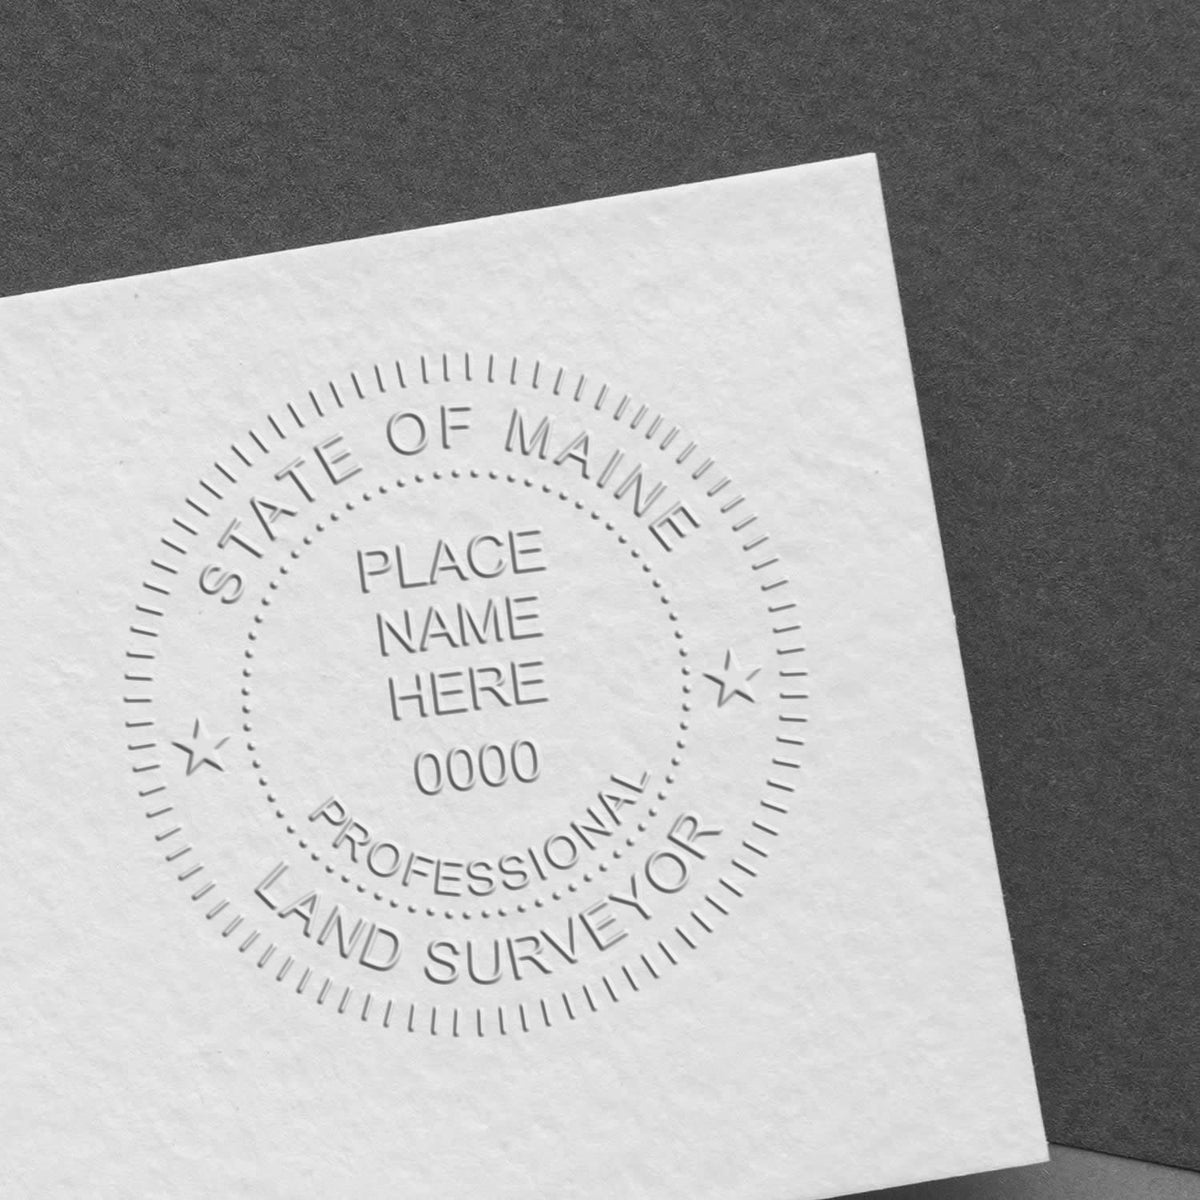 An alternative view of the Handheld Maine Land Surveyor Seal stamped on a sheet of paper showing the image in use